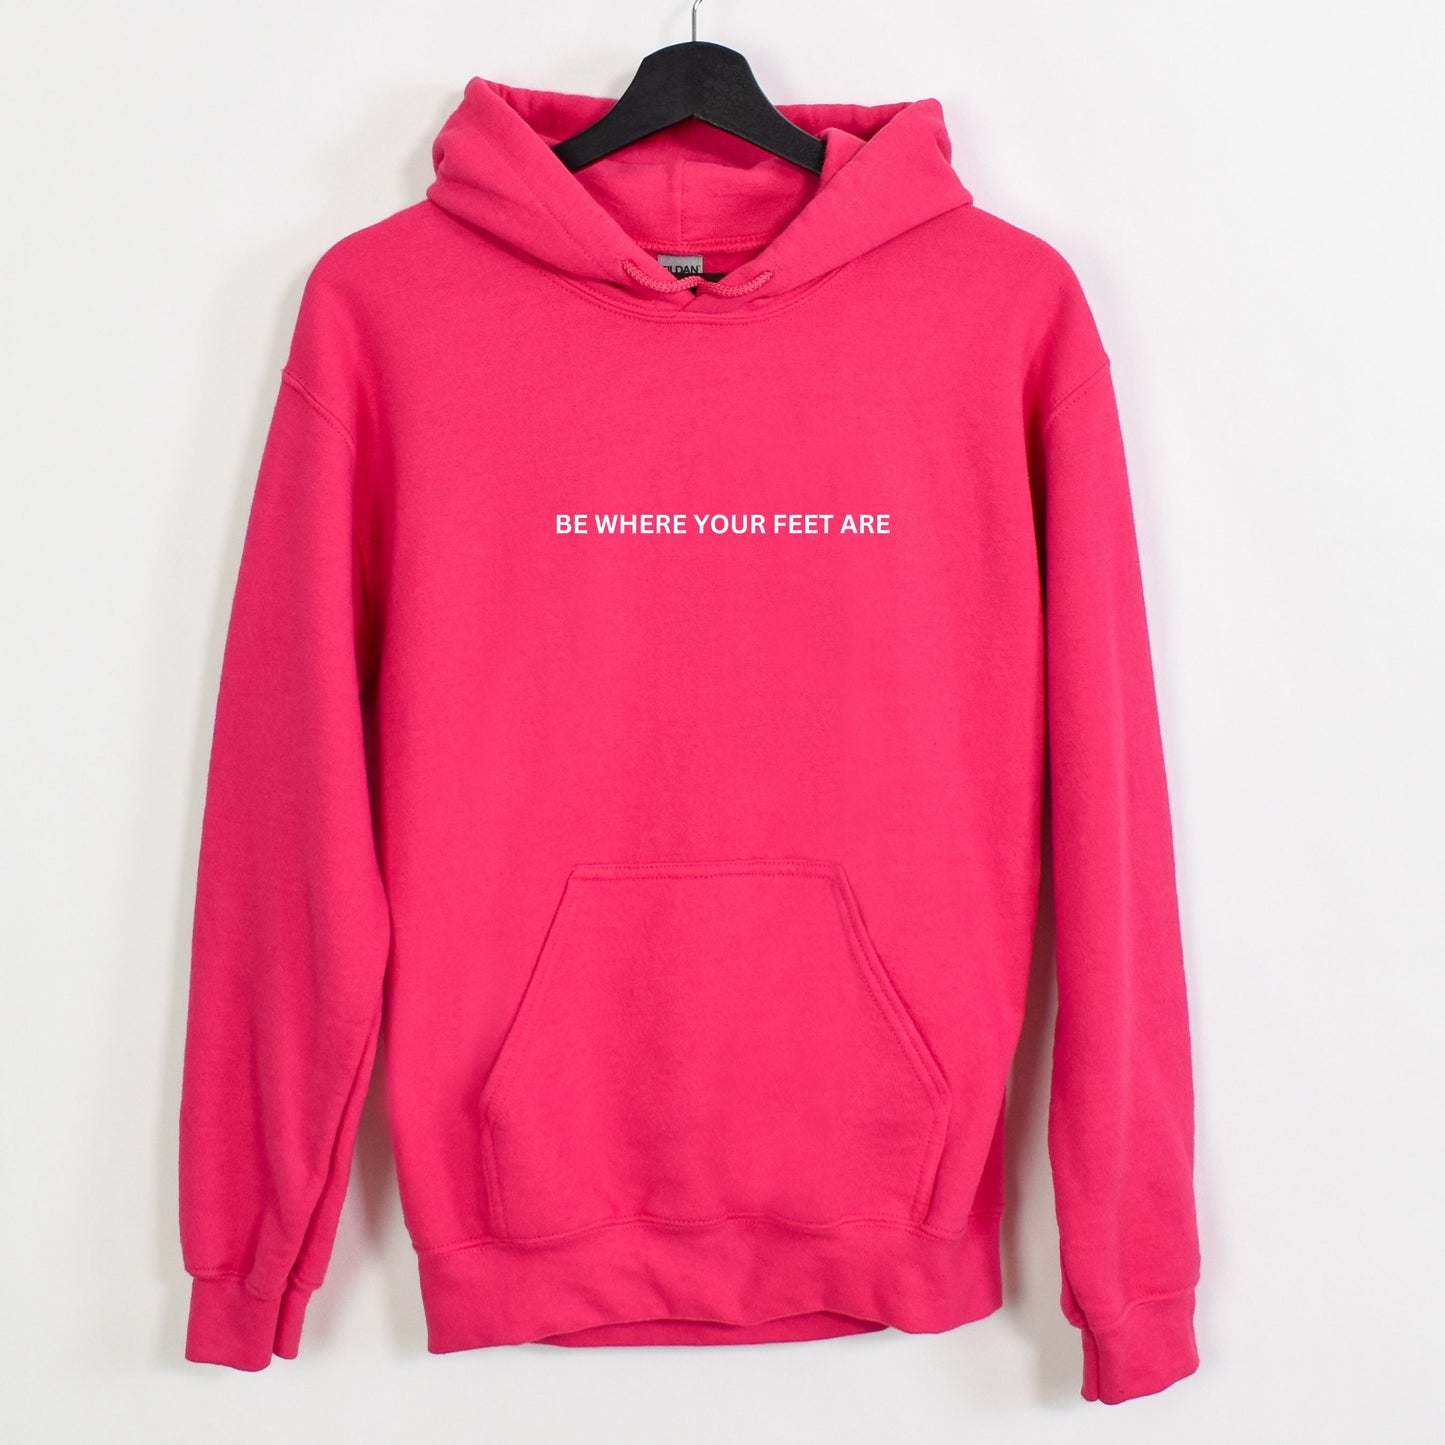 Be Where Your Feet Are Unisex Hoodie